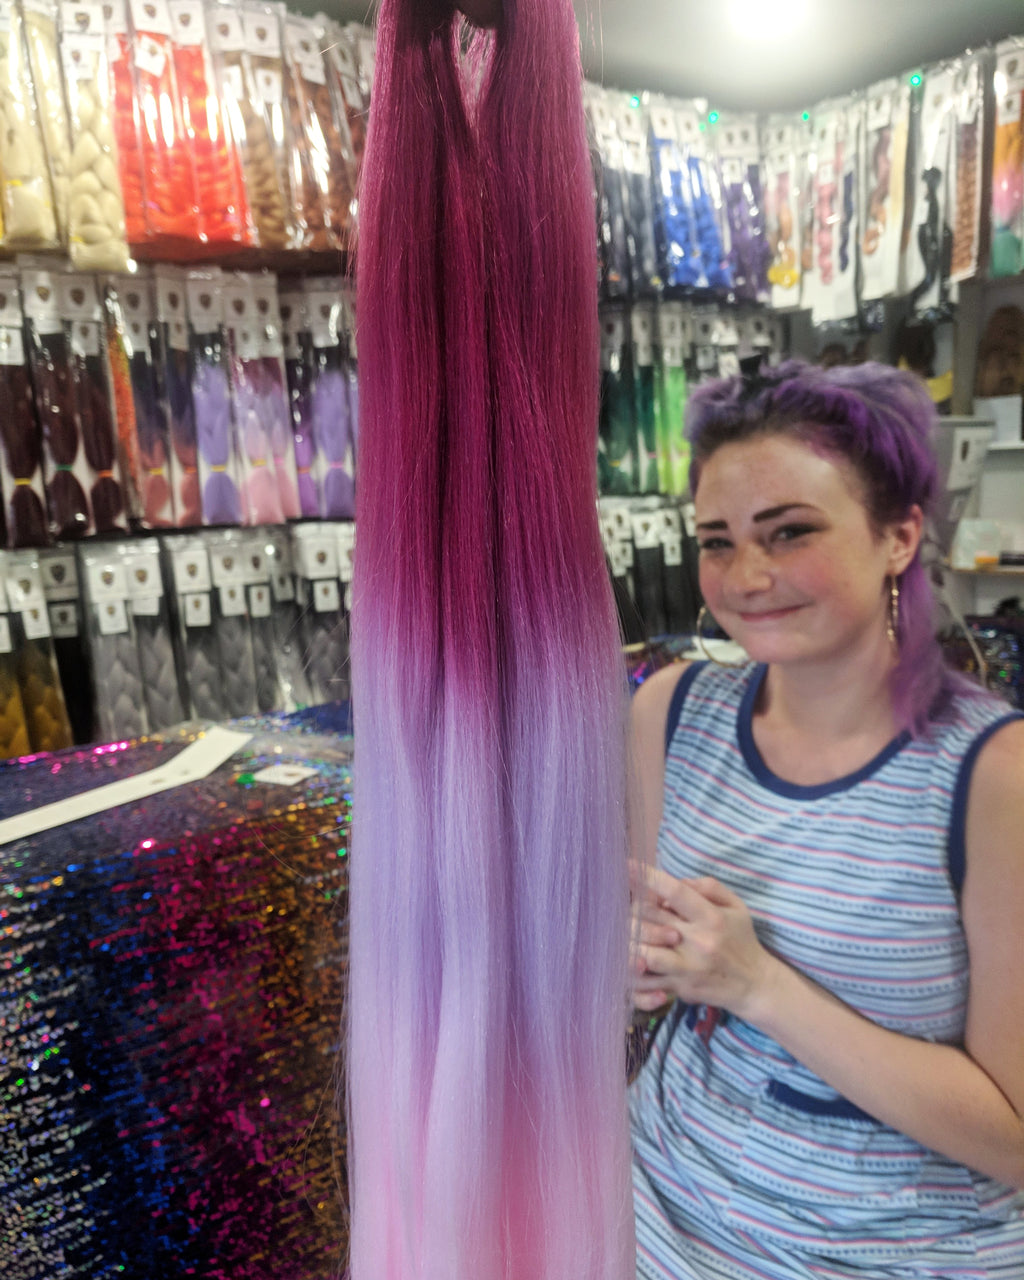 CATFACE HAIR PINK MELODY OMBRE BRAIDING HAIR - 24 INCHES.